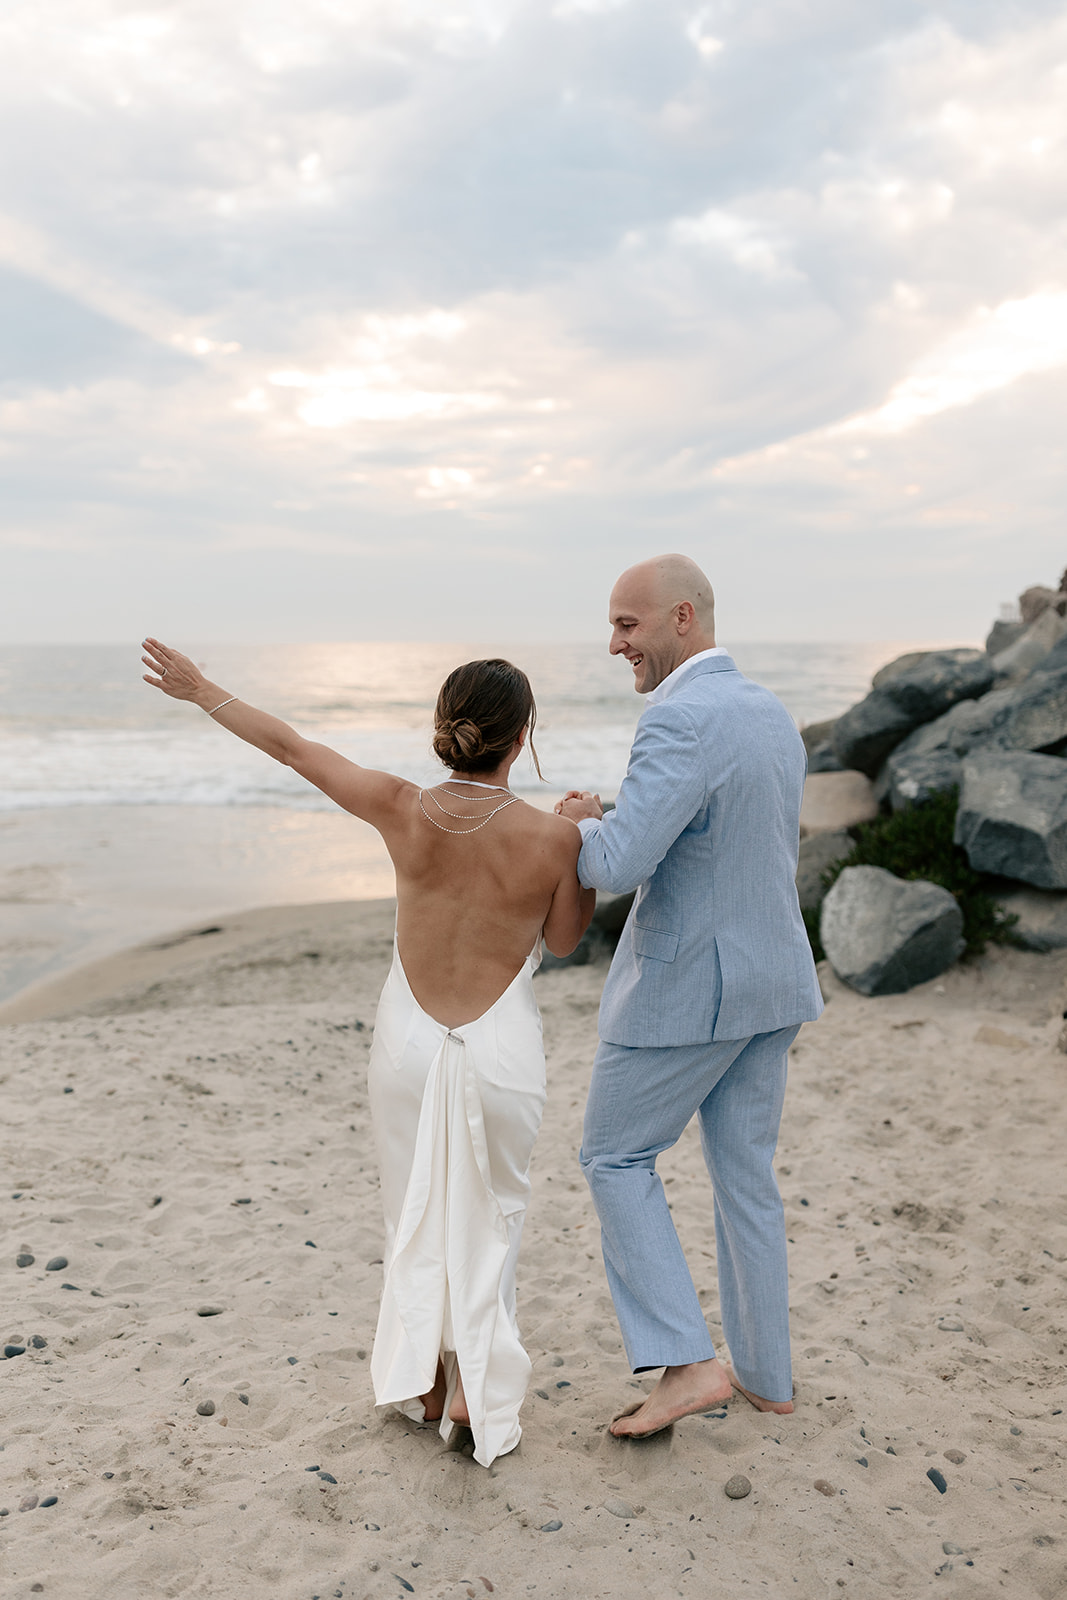 backyard beach wedding elopement encinitas southern california socal bride and groom pictures white a line wedding dress